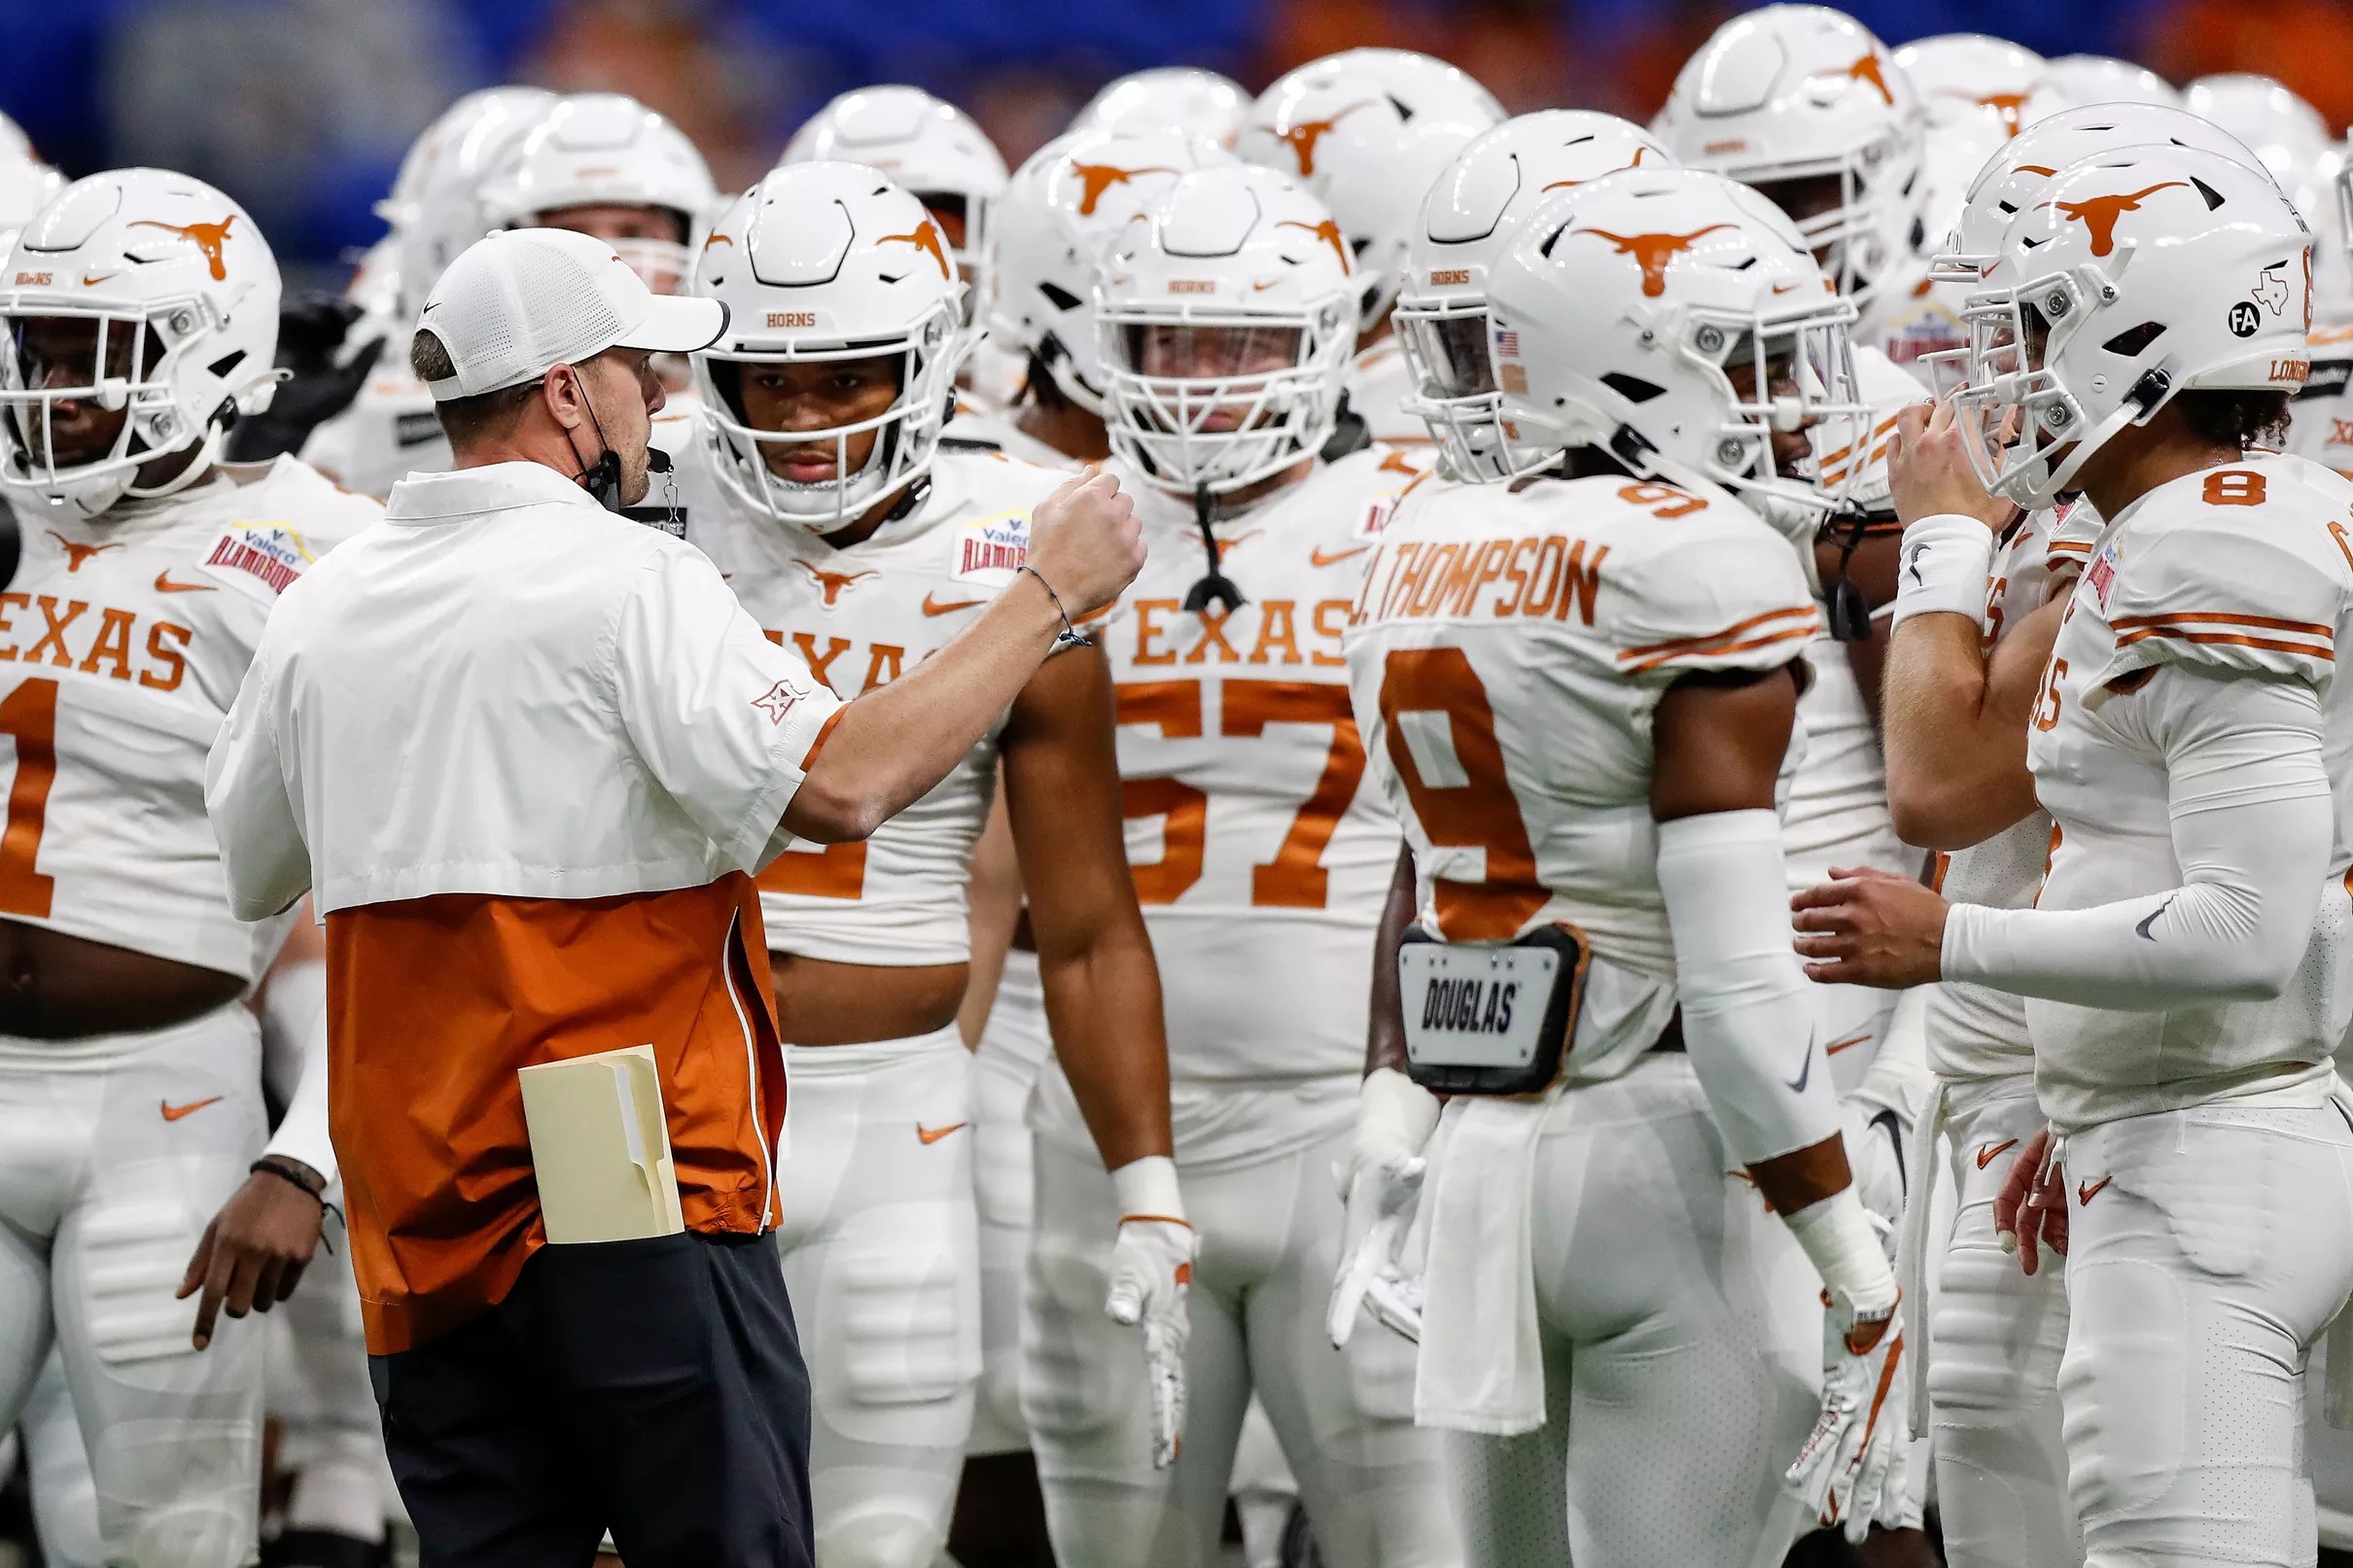 Texas players were negatively recruiting against Tom Herman